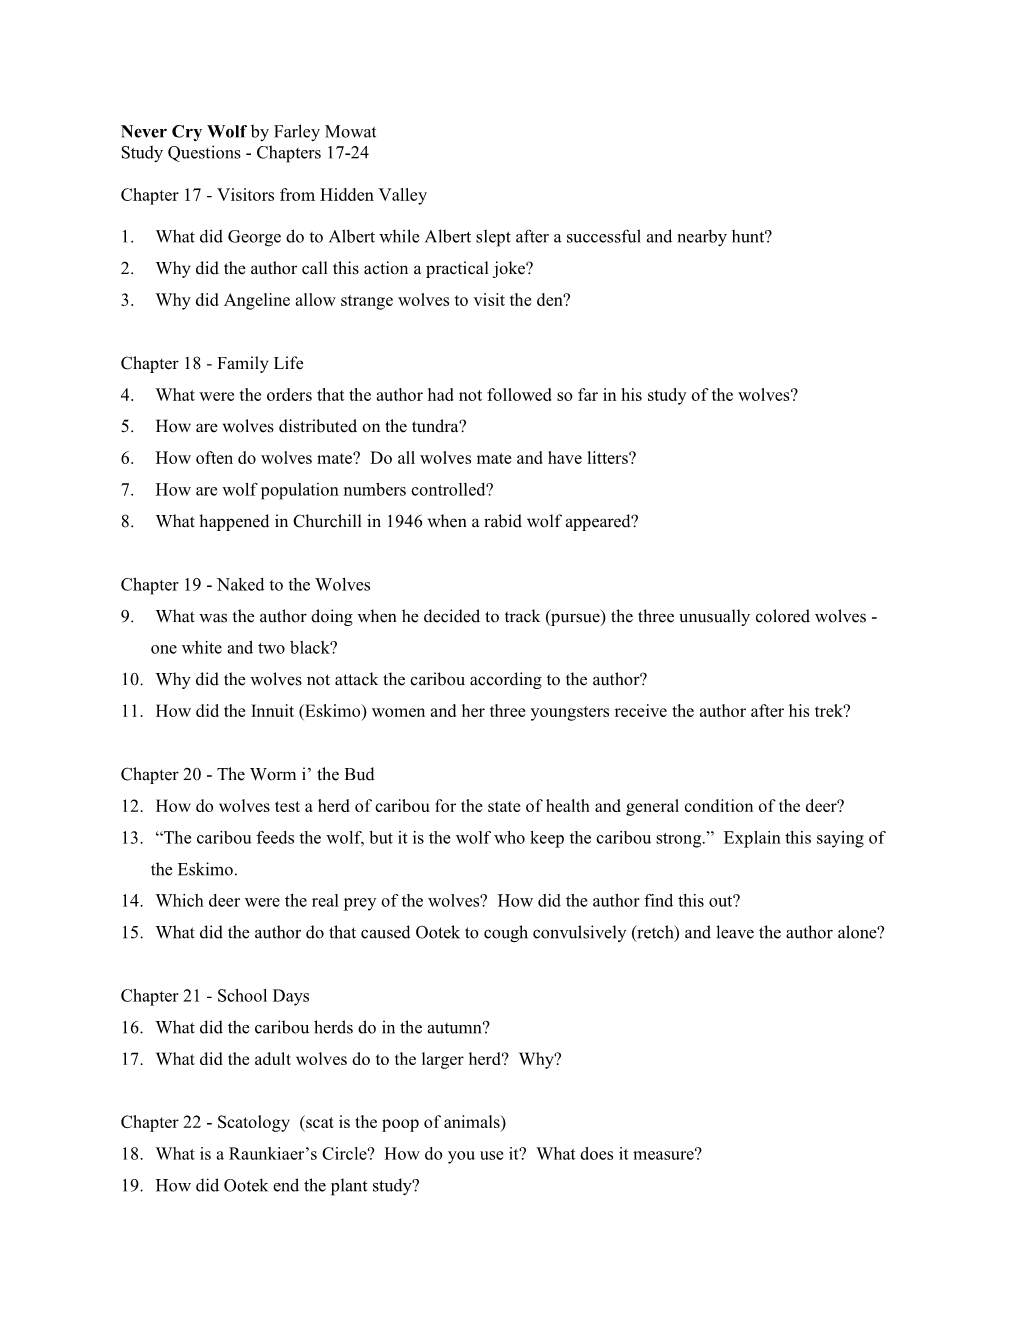 Never Cry Wolf by Farley Mowat Study Questions - Chapters 17-24